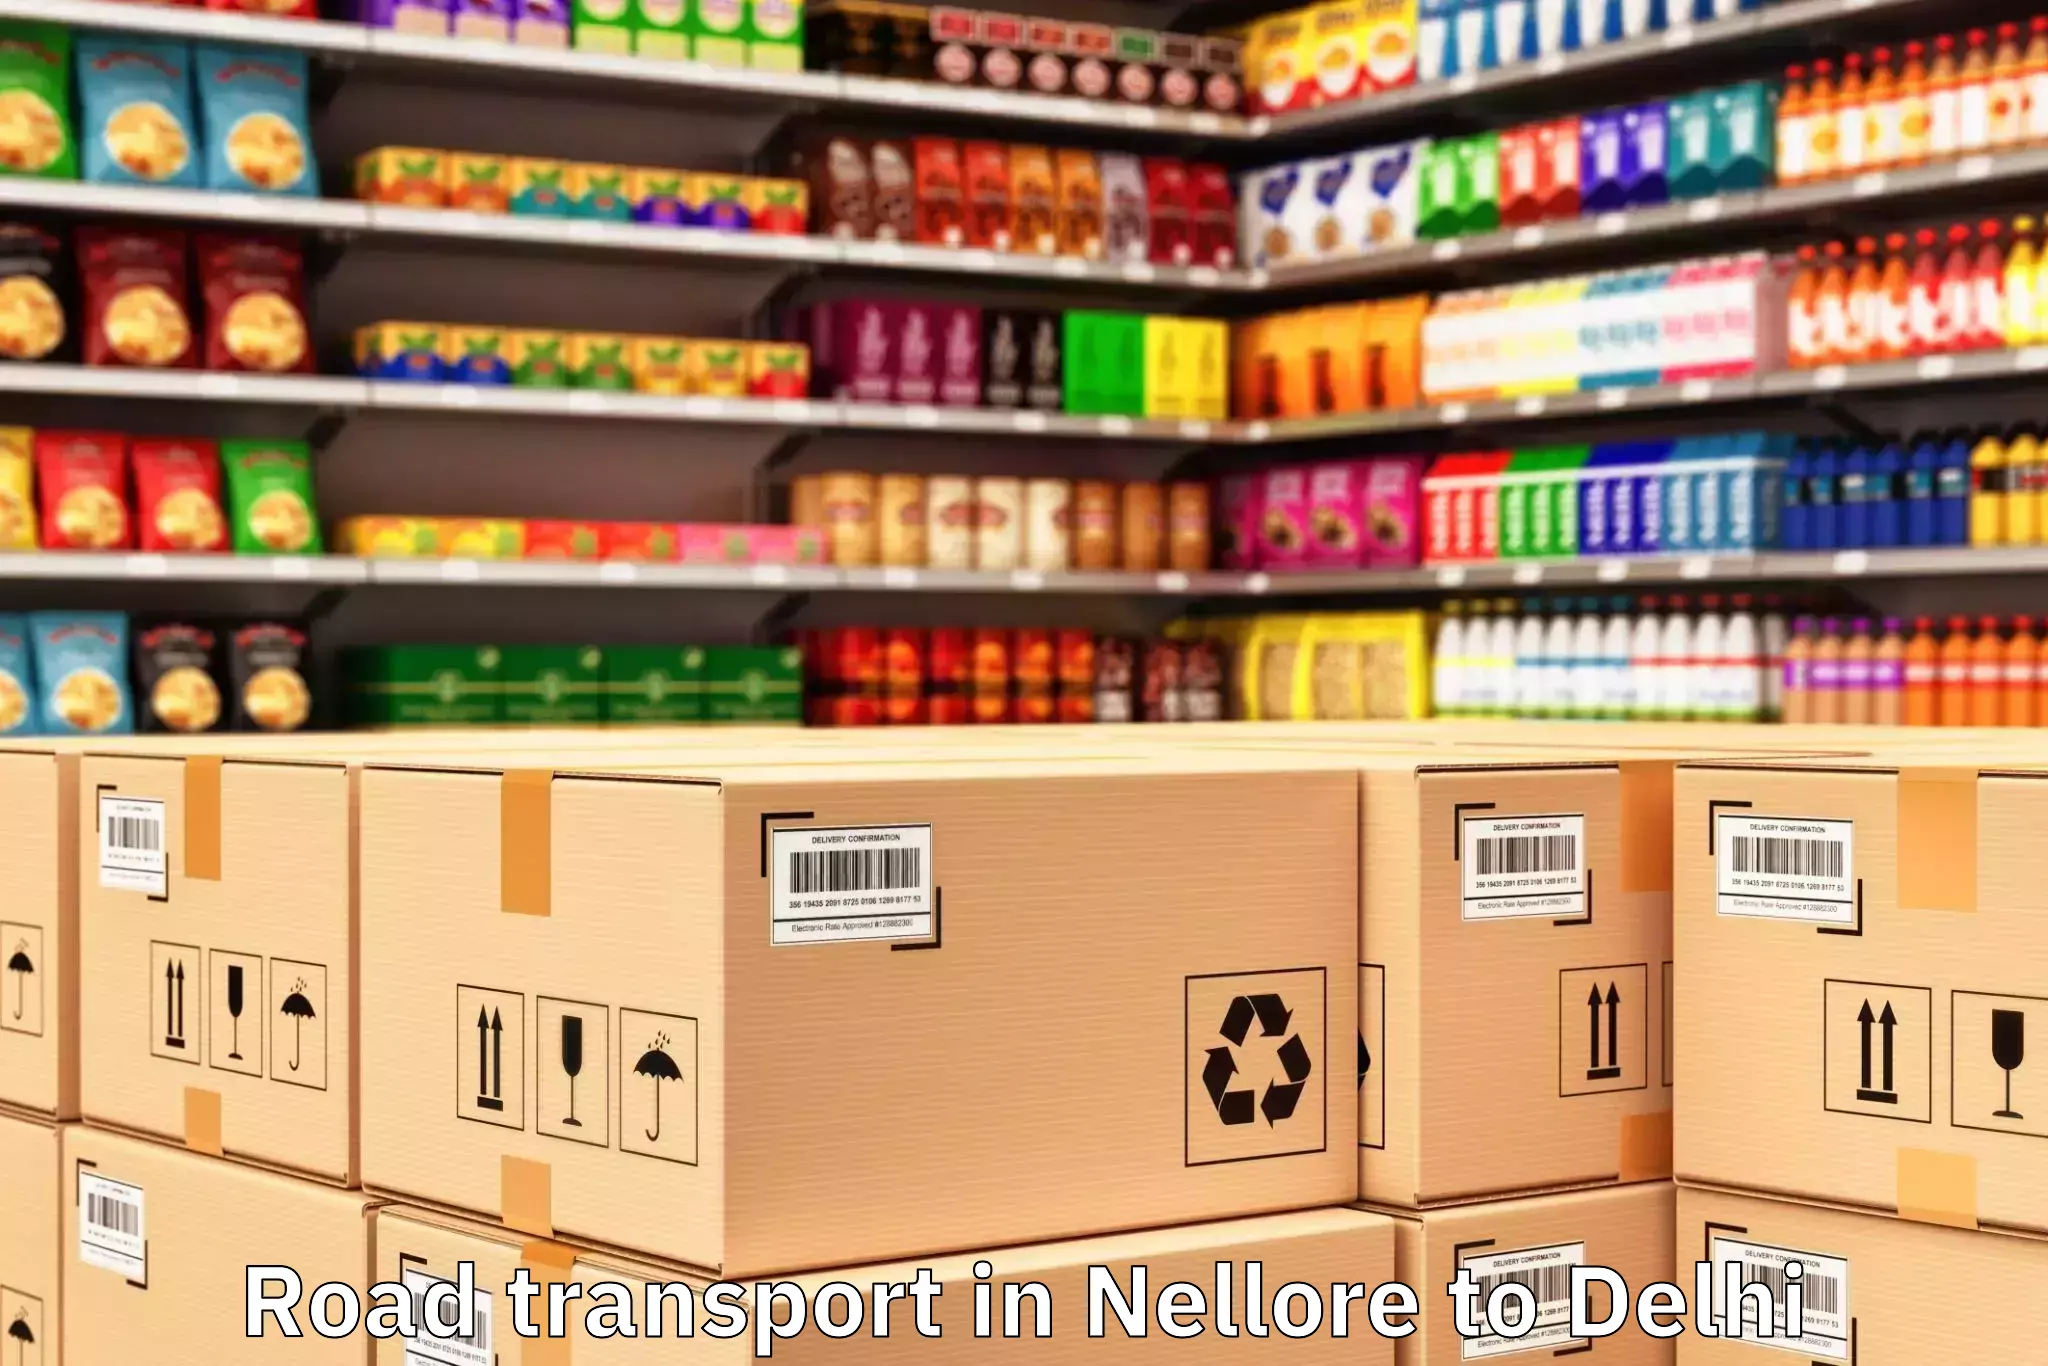 Trusted Nellore to Functional Industrial Estate For Electronics Road Transport